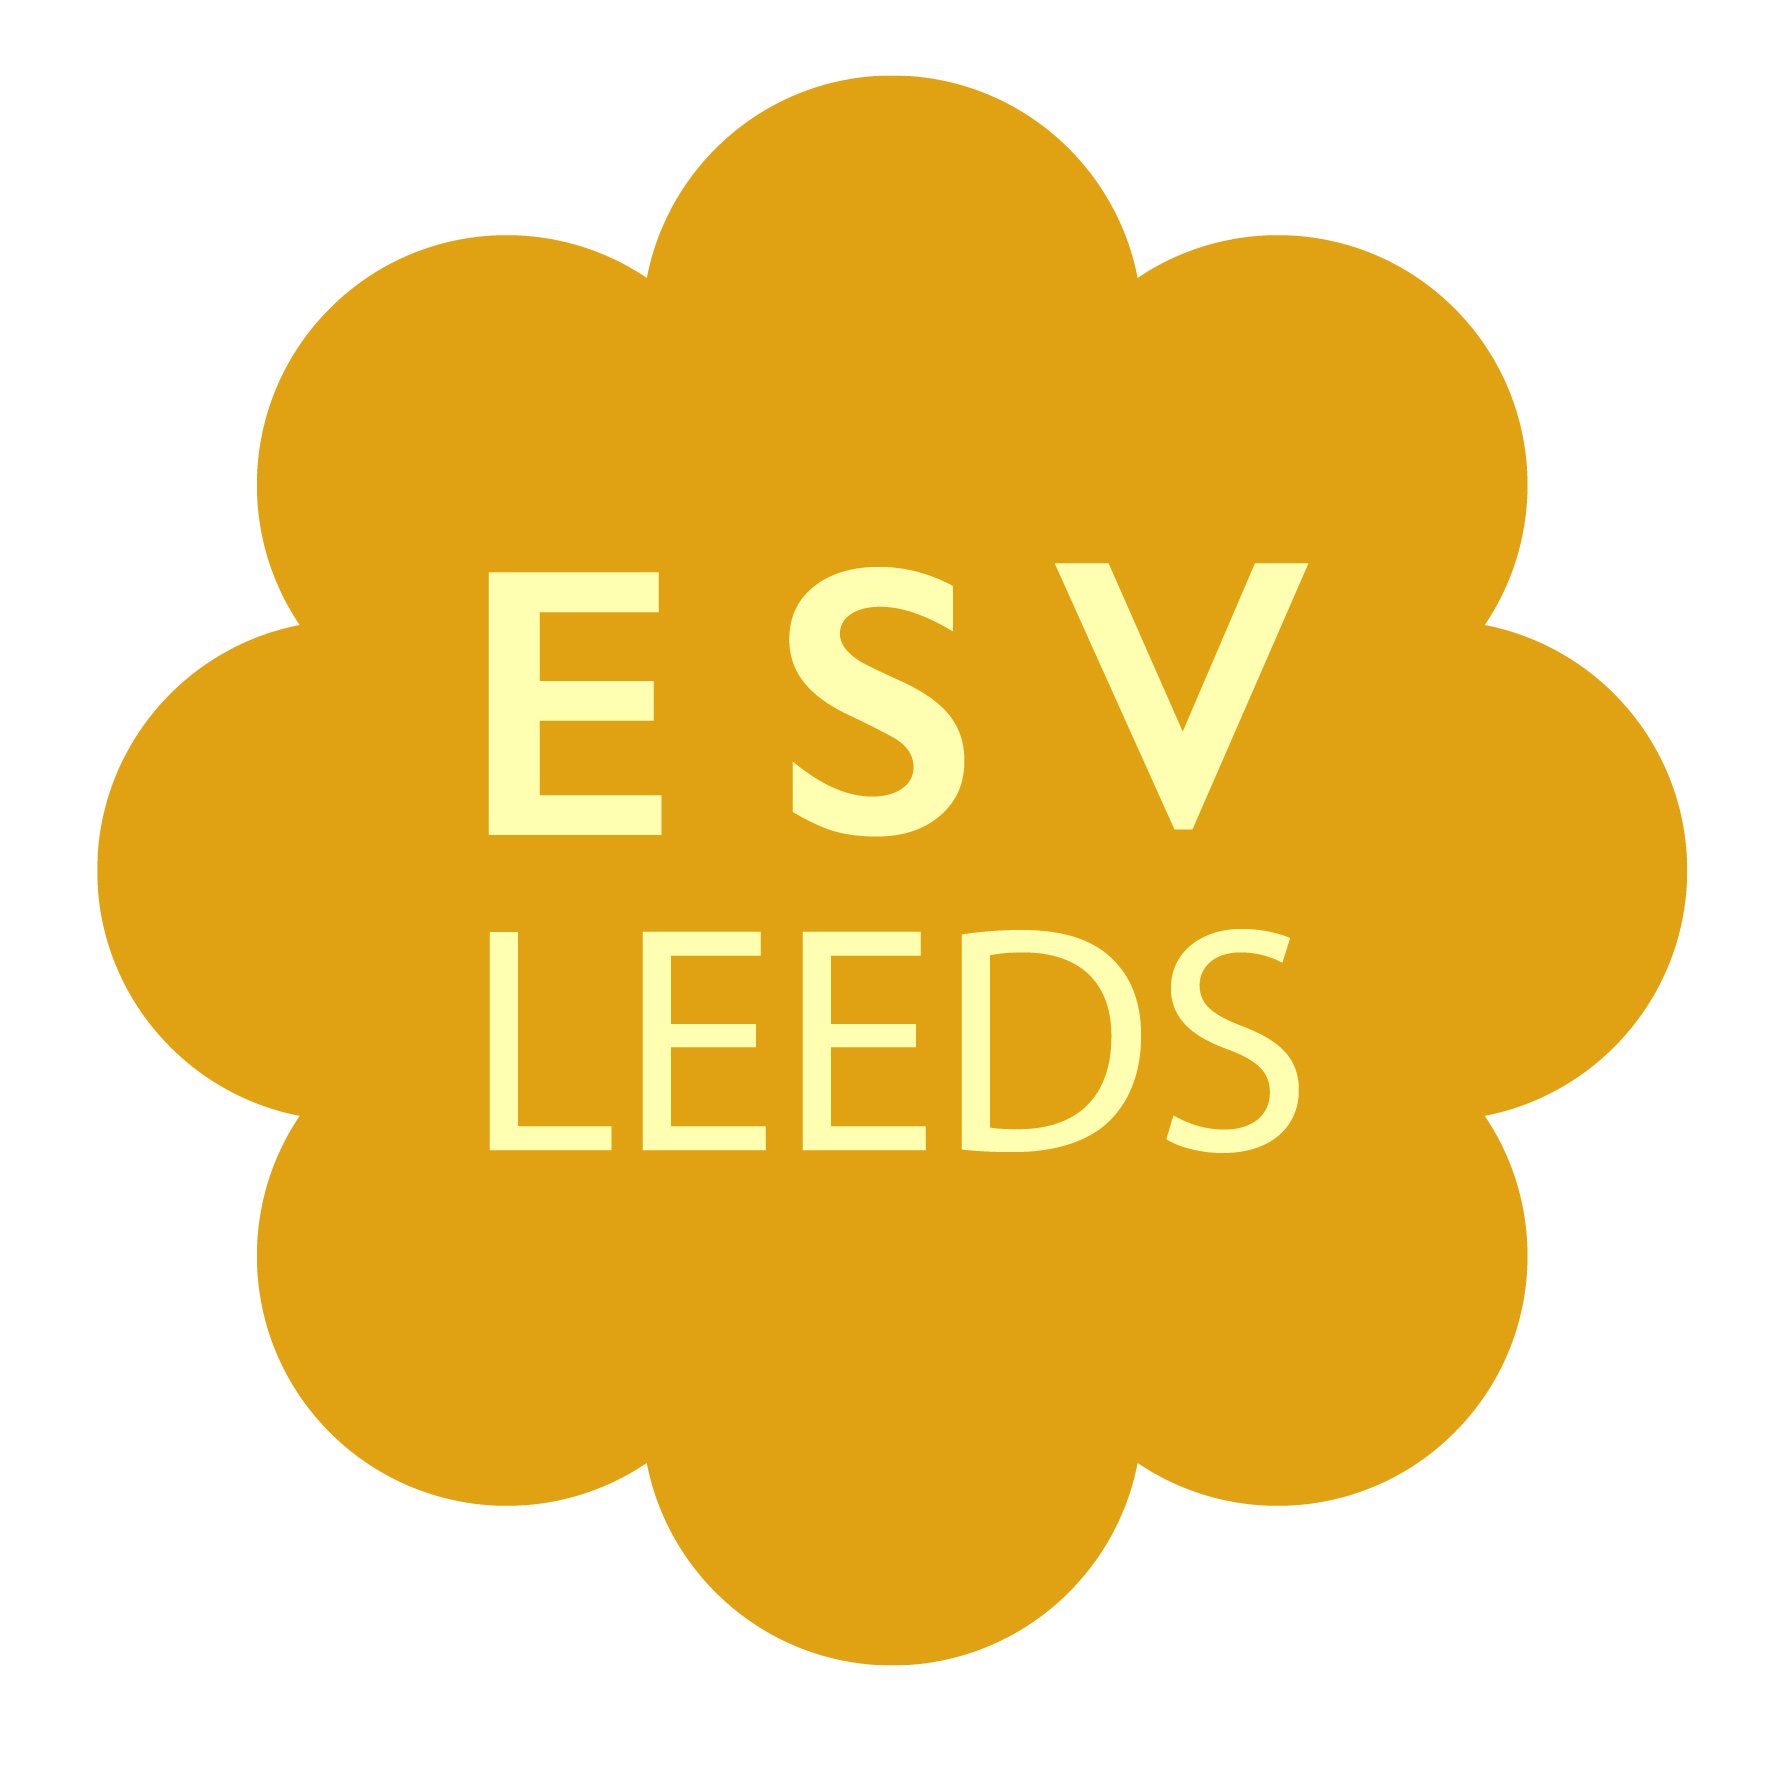 A @VolActionLeeds project. We coordinate corporate volunteer support for community projects in Leeds, arranging mutually beneficial volunteering experiences.